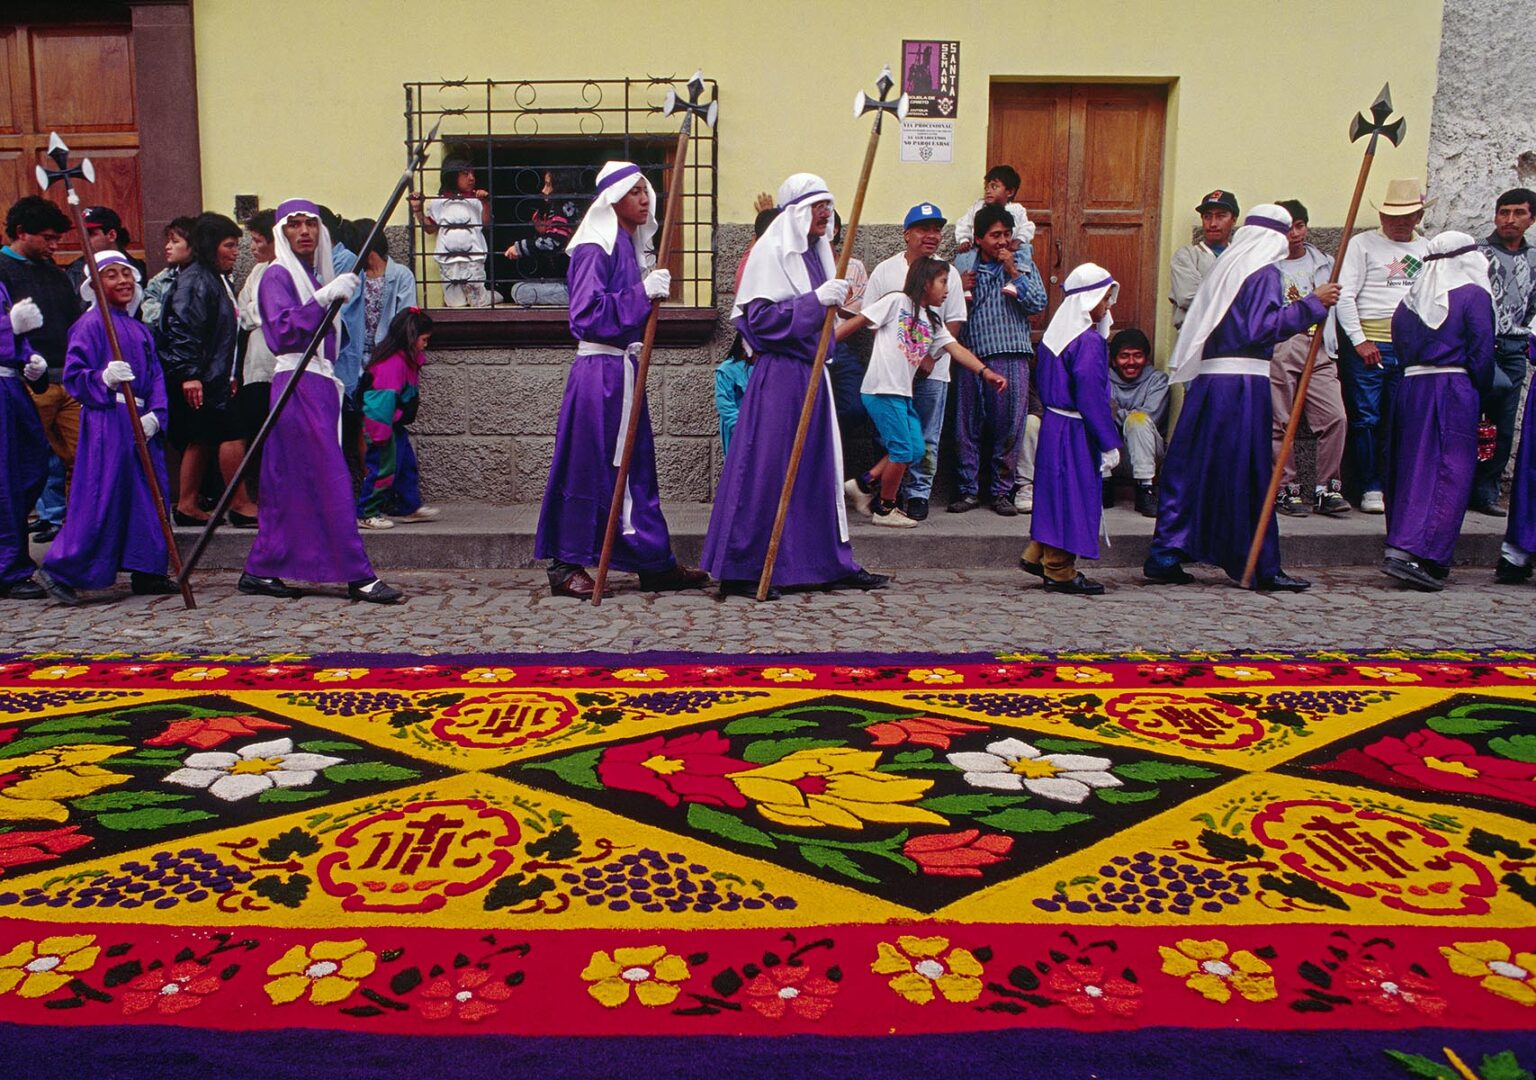 ALFOMBRA (carpet) made of sawdust and flowers for GOOD FRIDAY, a tradition dating to the 16th century - ANTIGUA, GUATEMALA